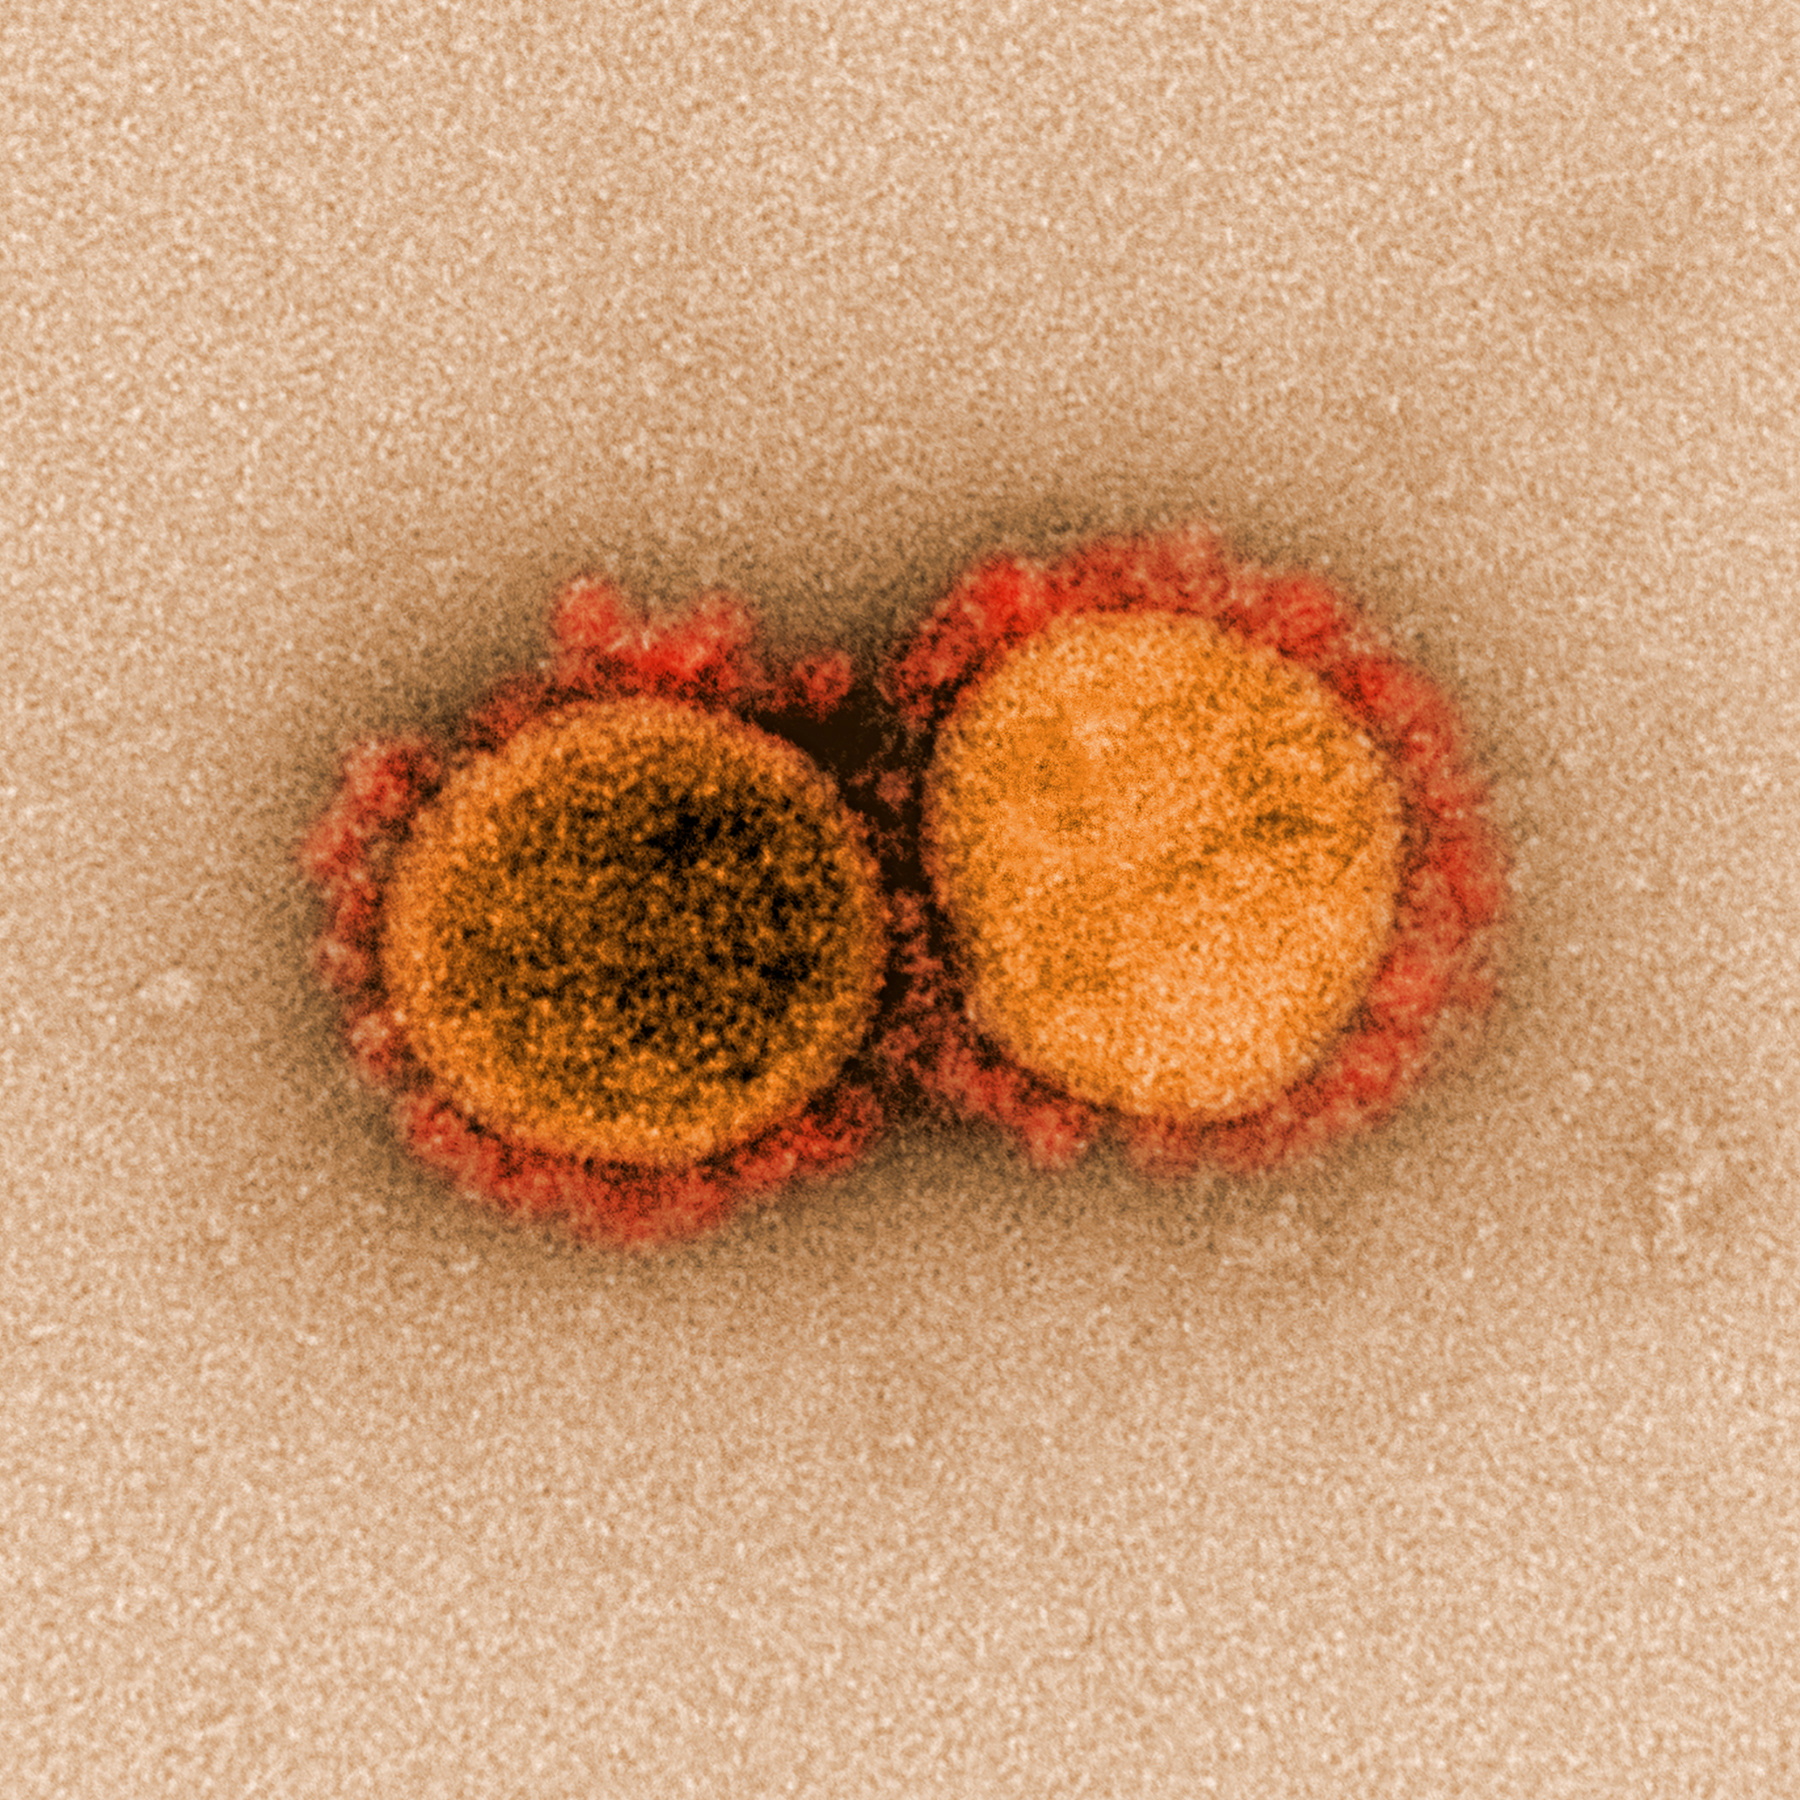 FILE PHOTO: Transmission electron micrograph of SARS-CoV-2 virus particles, also known as novel coronavirus